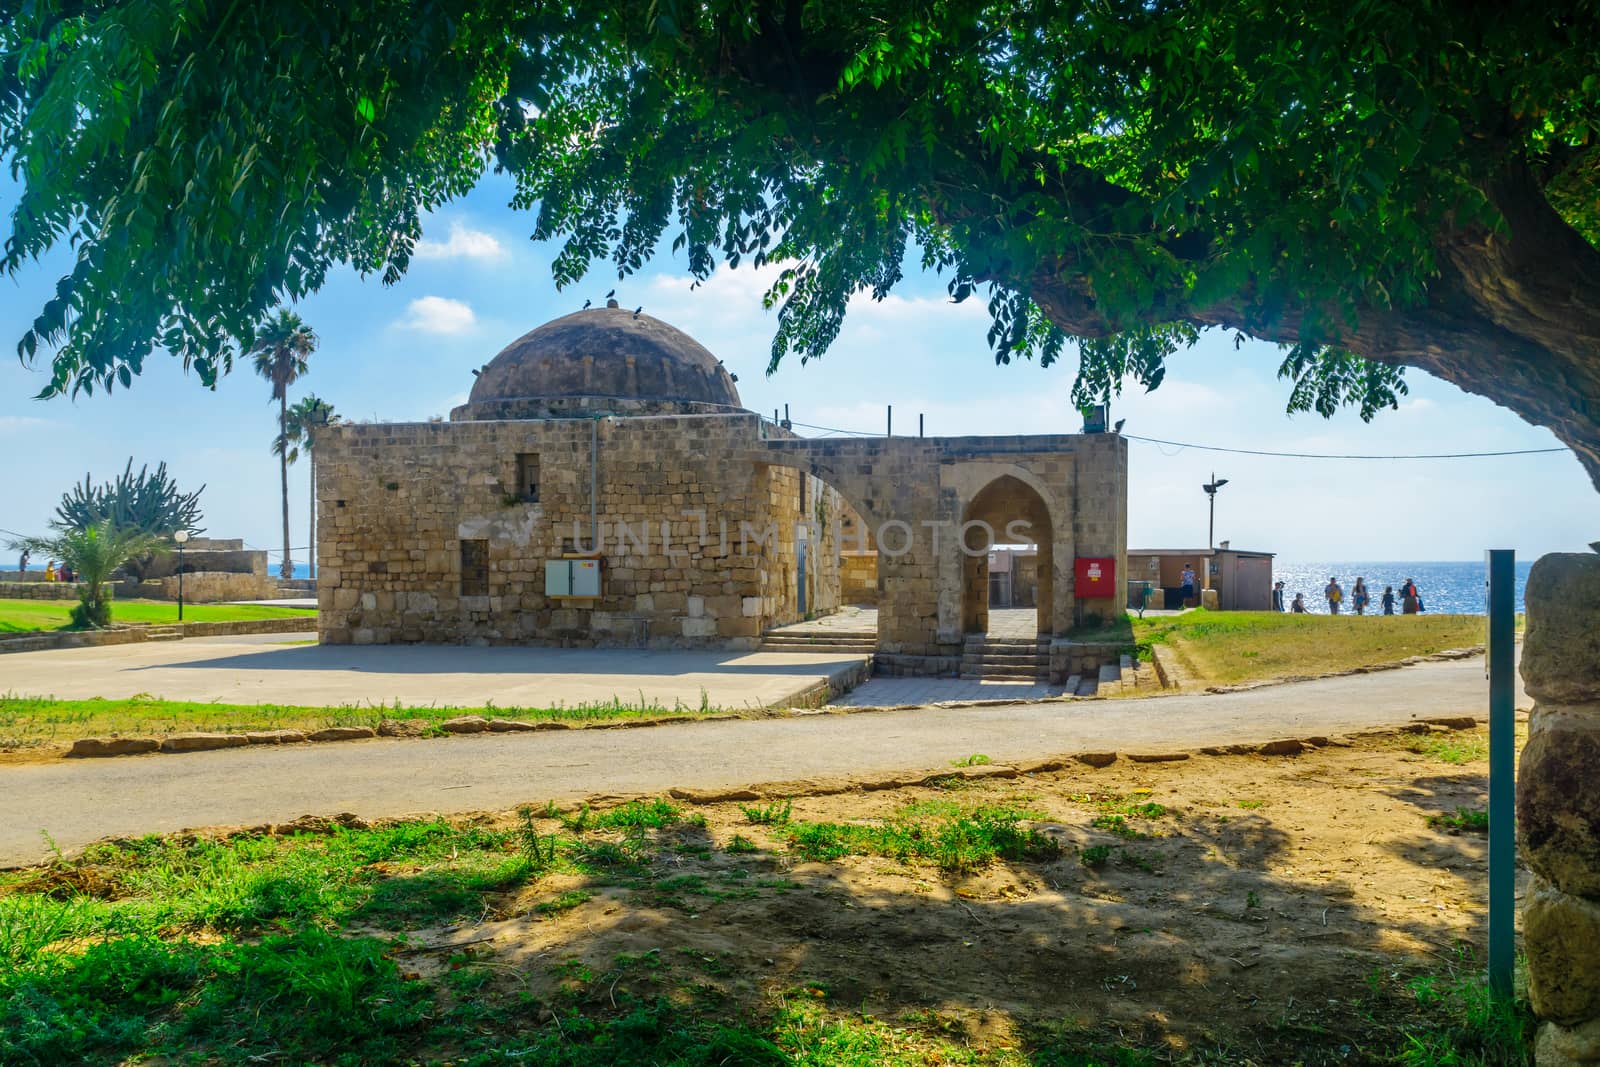 Achziv, Israel - July 22, 2020: View of an old mosque building, with visitors, in Achziv national park, northern Israel